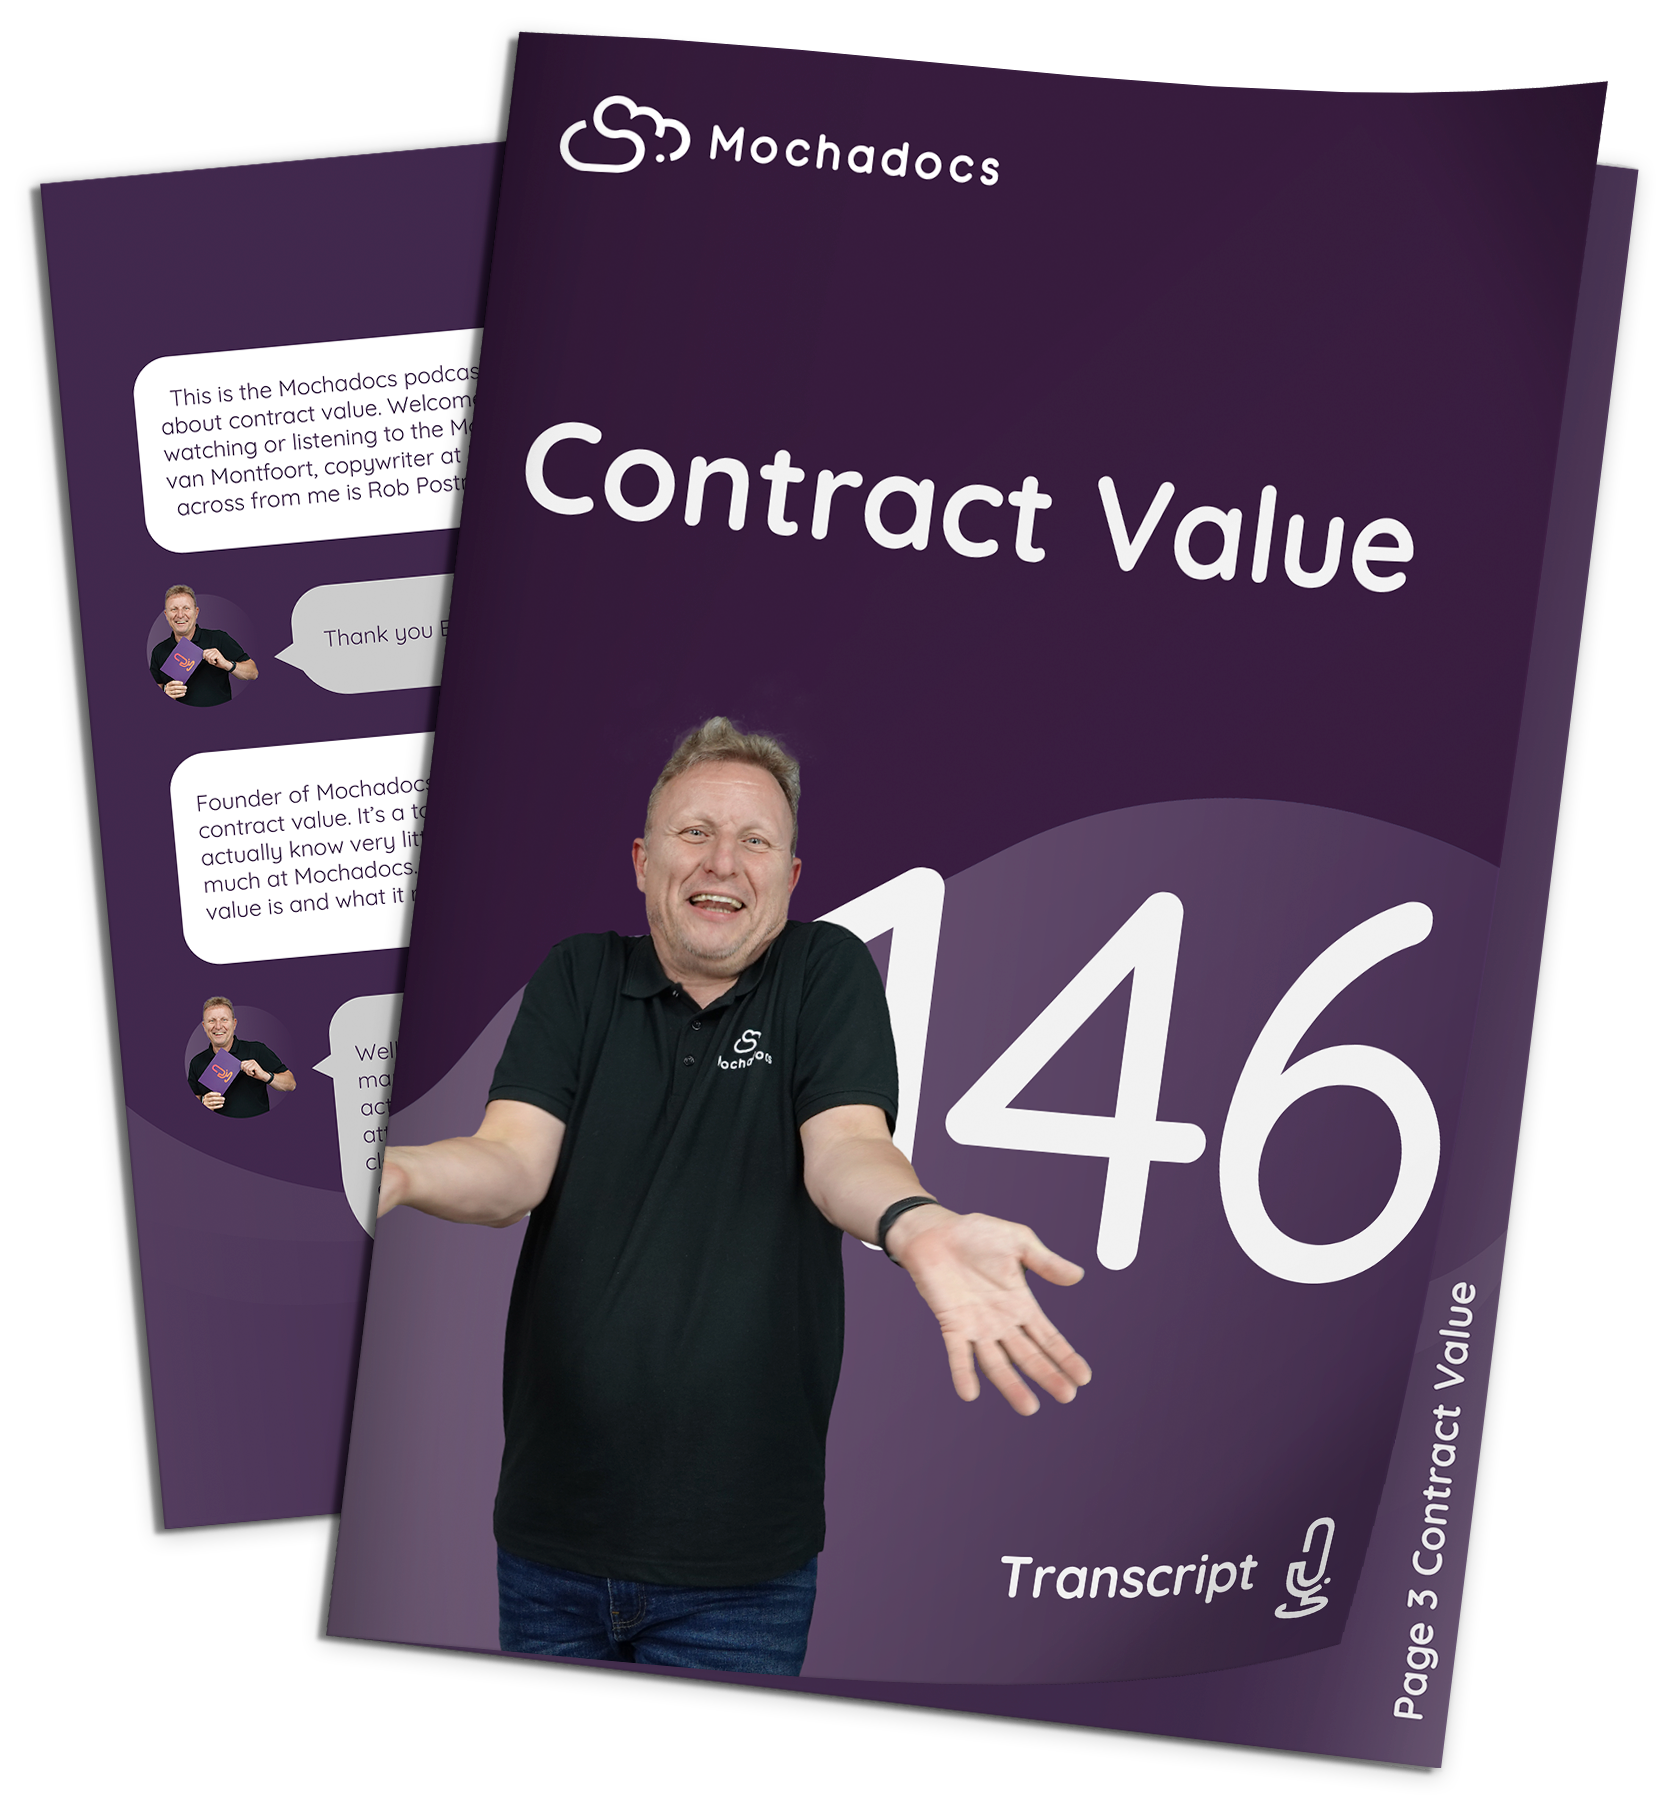 Mochadocs - Contract Lifecycle Management - Transcripts - Contract Value